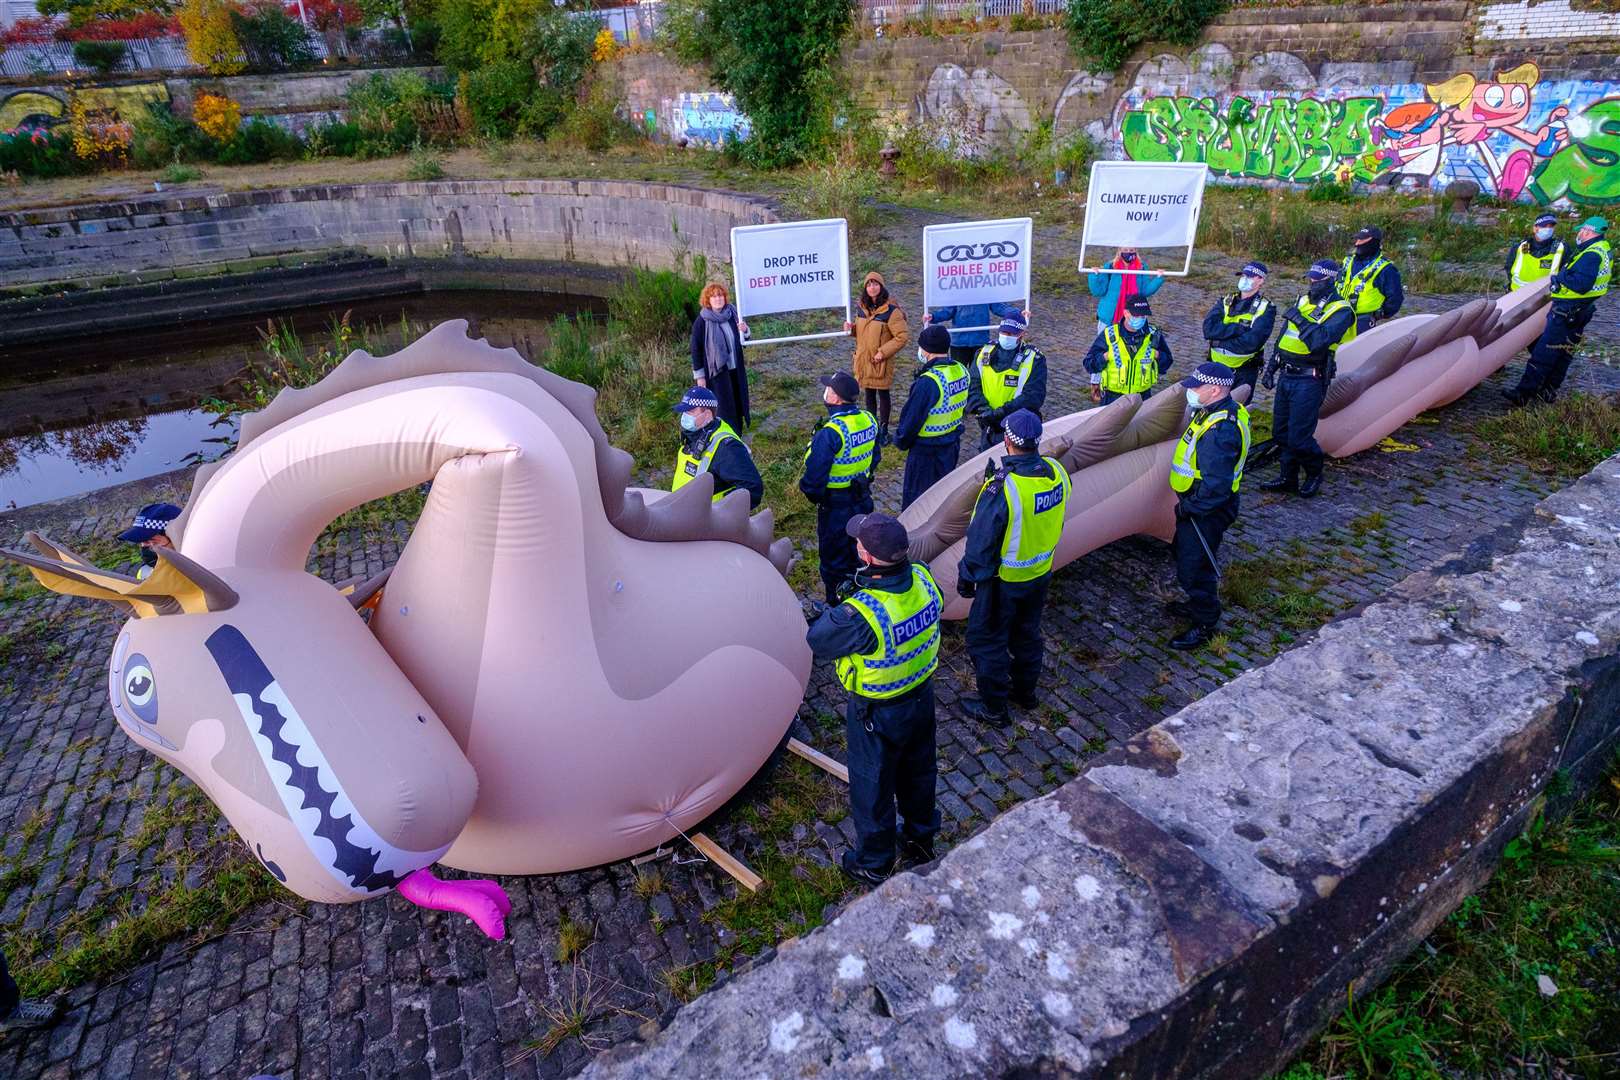 On the banks of the River Clyde near the Cop26 venue, poverty was the subject of a stunt featuring an inflatable Loch Ness Monster (Jess Hurd/PA)